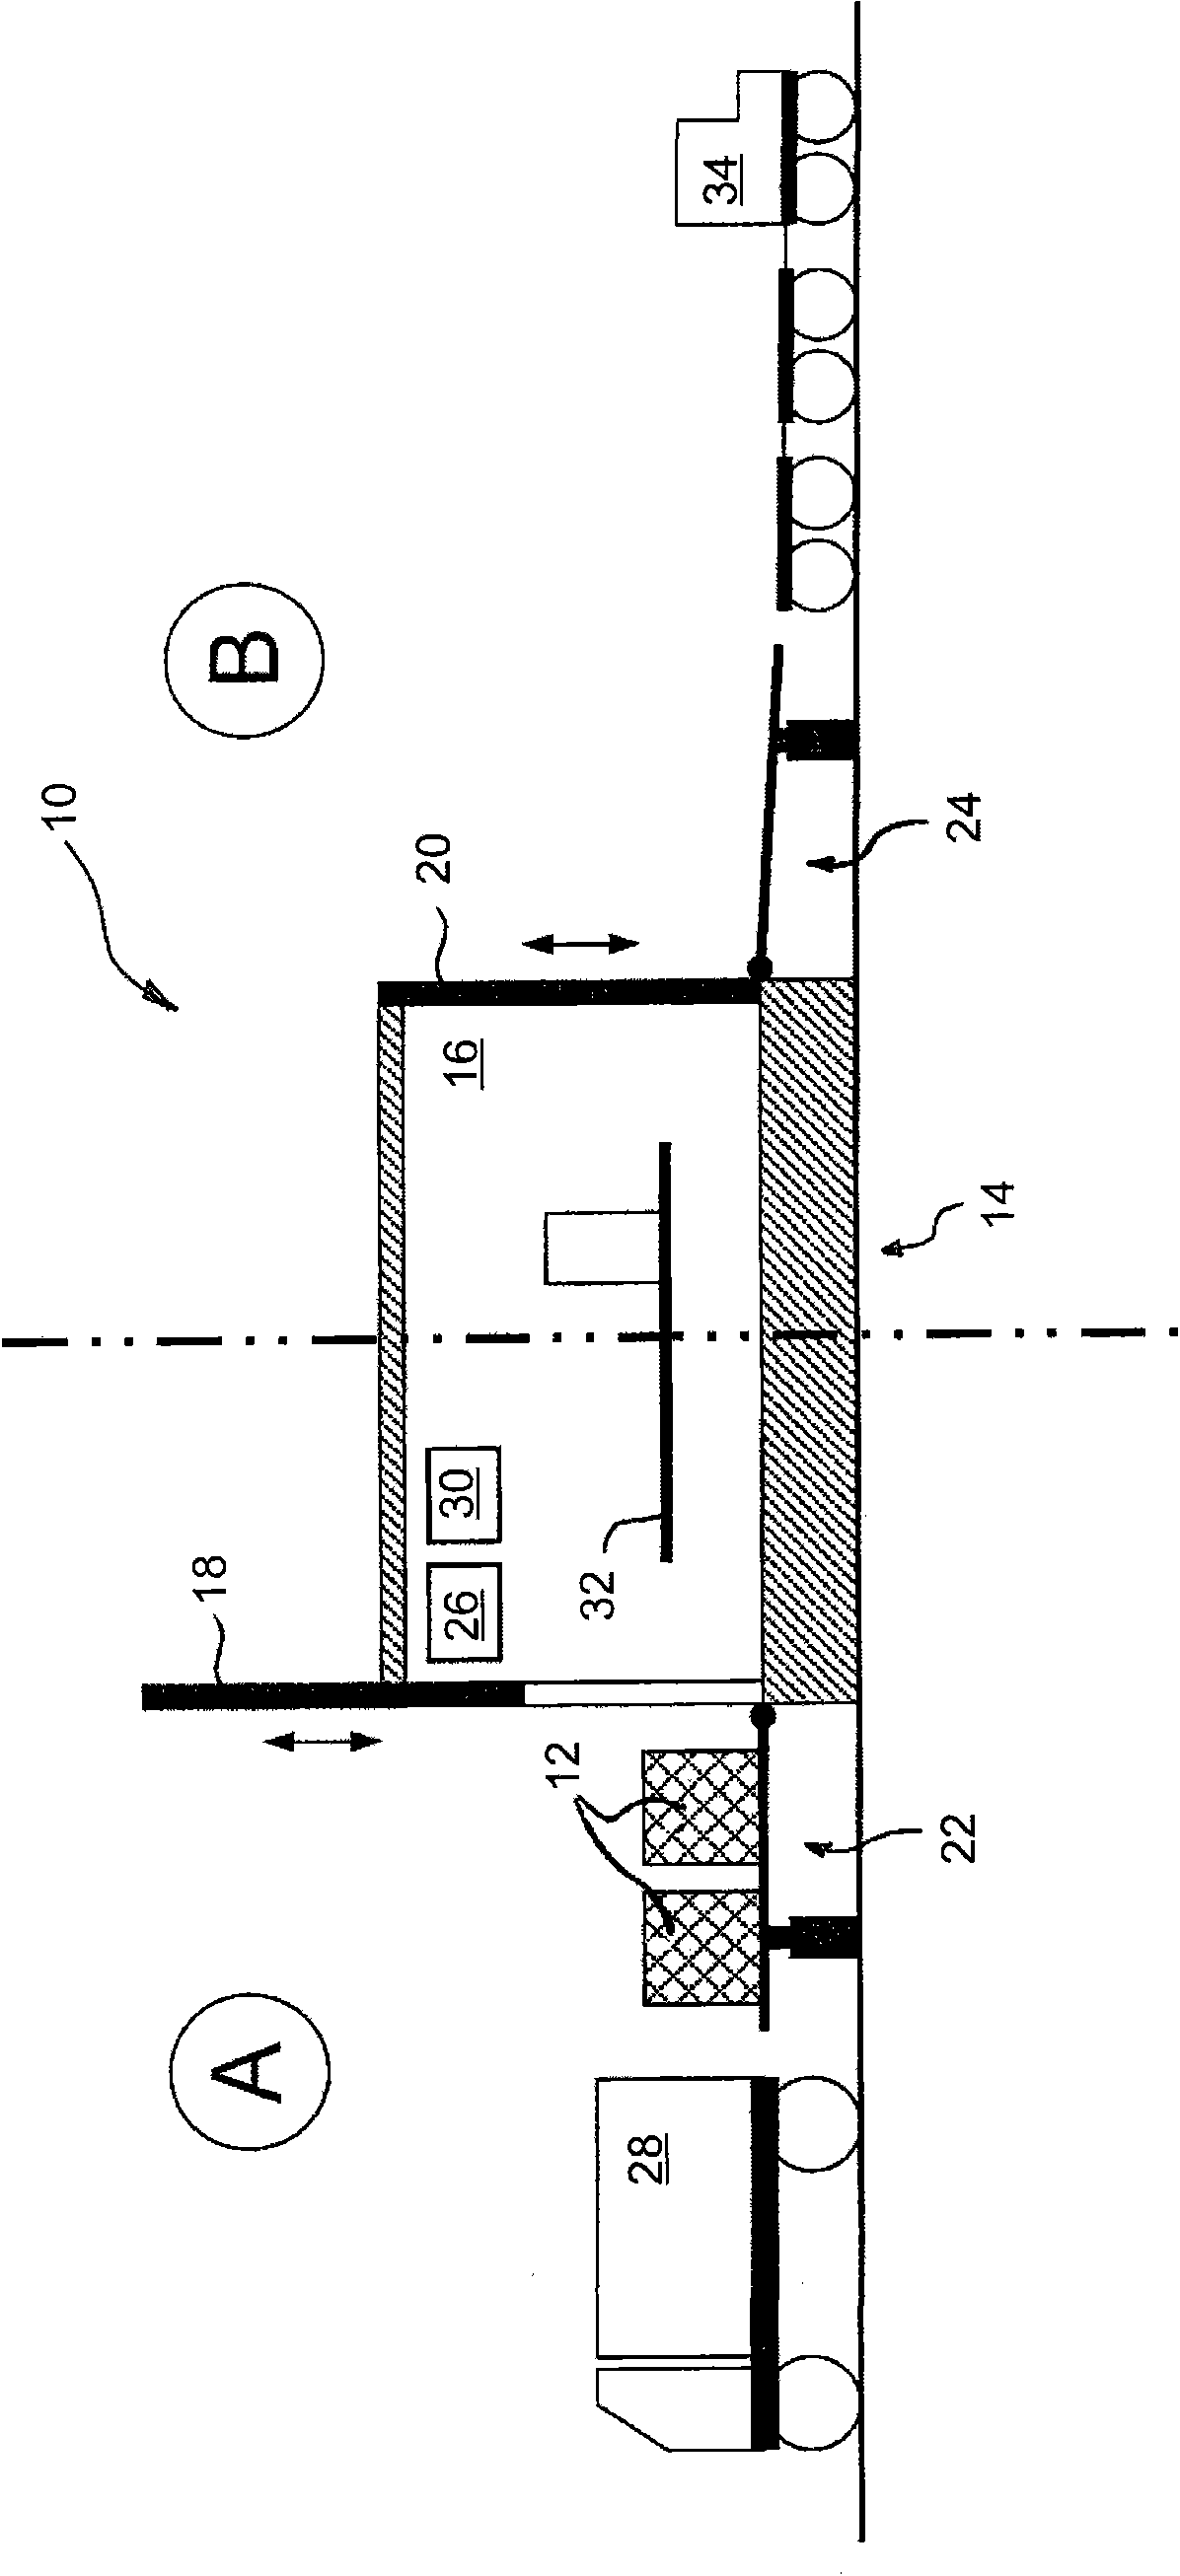 Method for transferring air cargo loading units, and transfer and screening system for carrying out said method